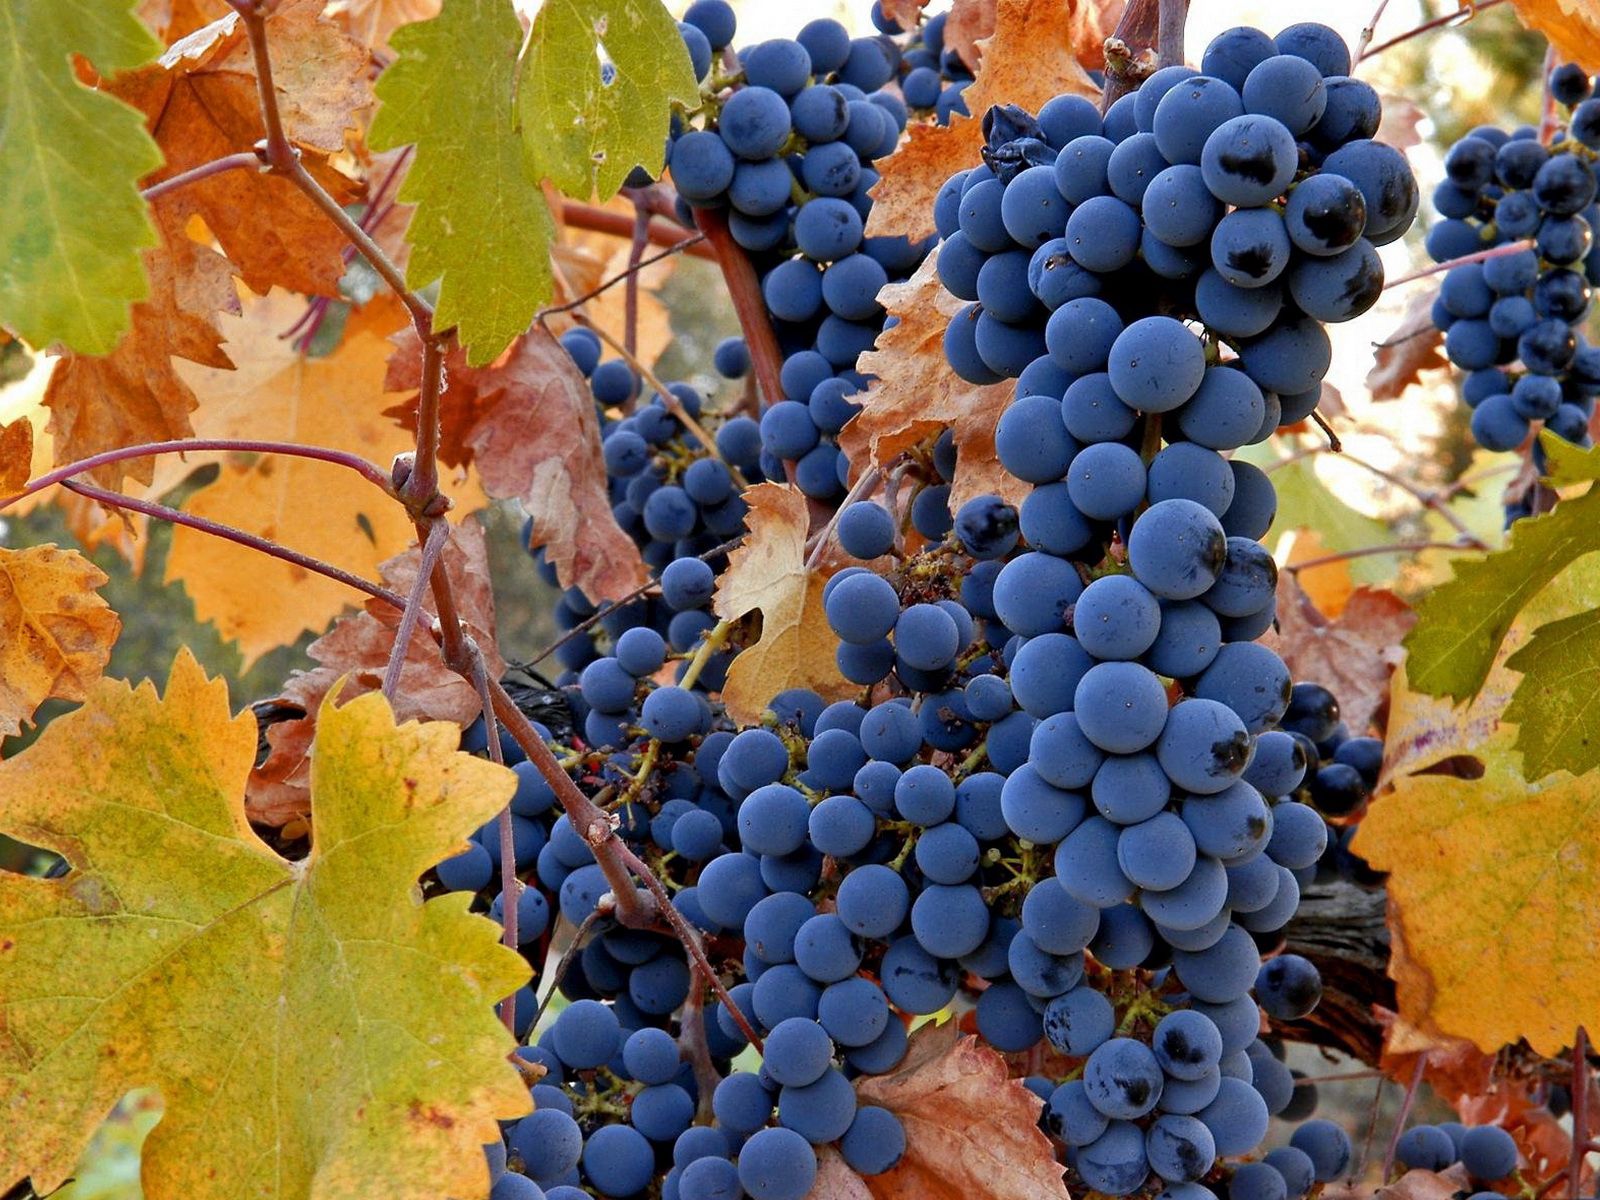 grapes, fruits, bunches, autumn, food, leaves, vine, clusters, harvest